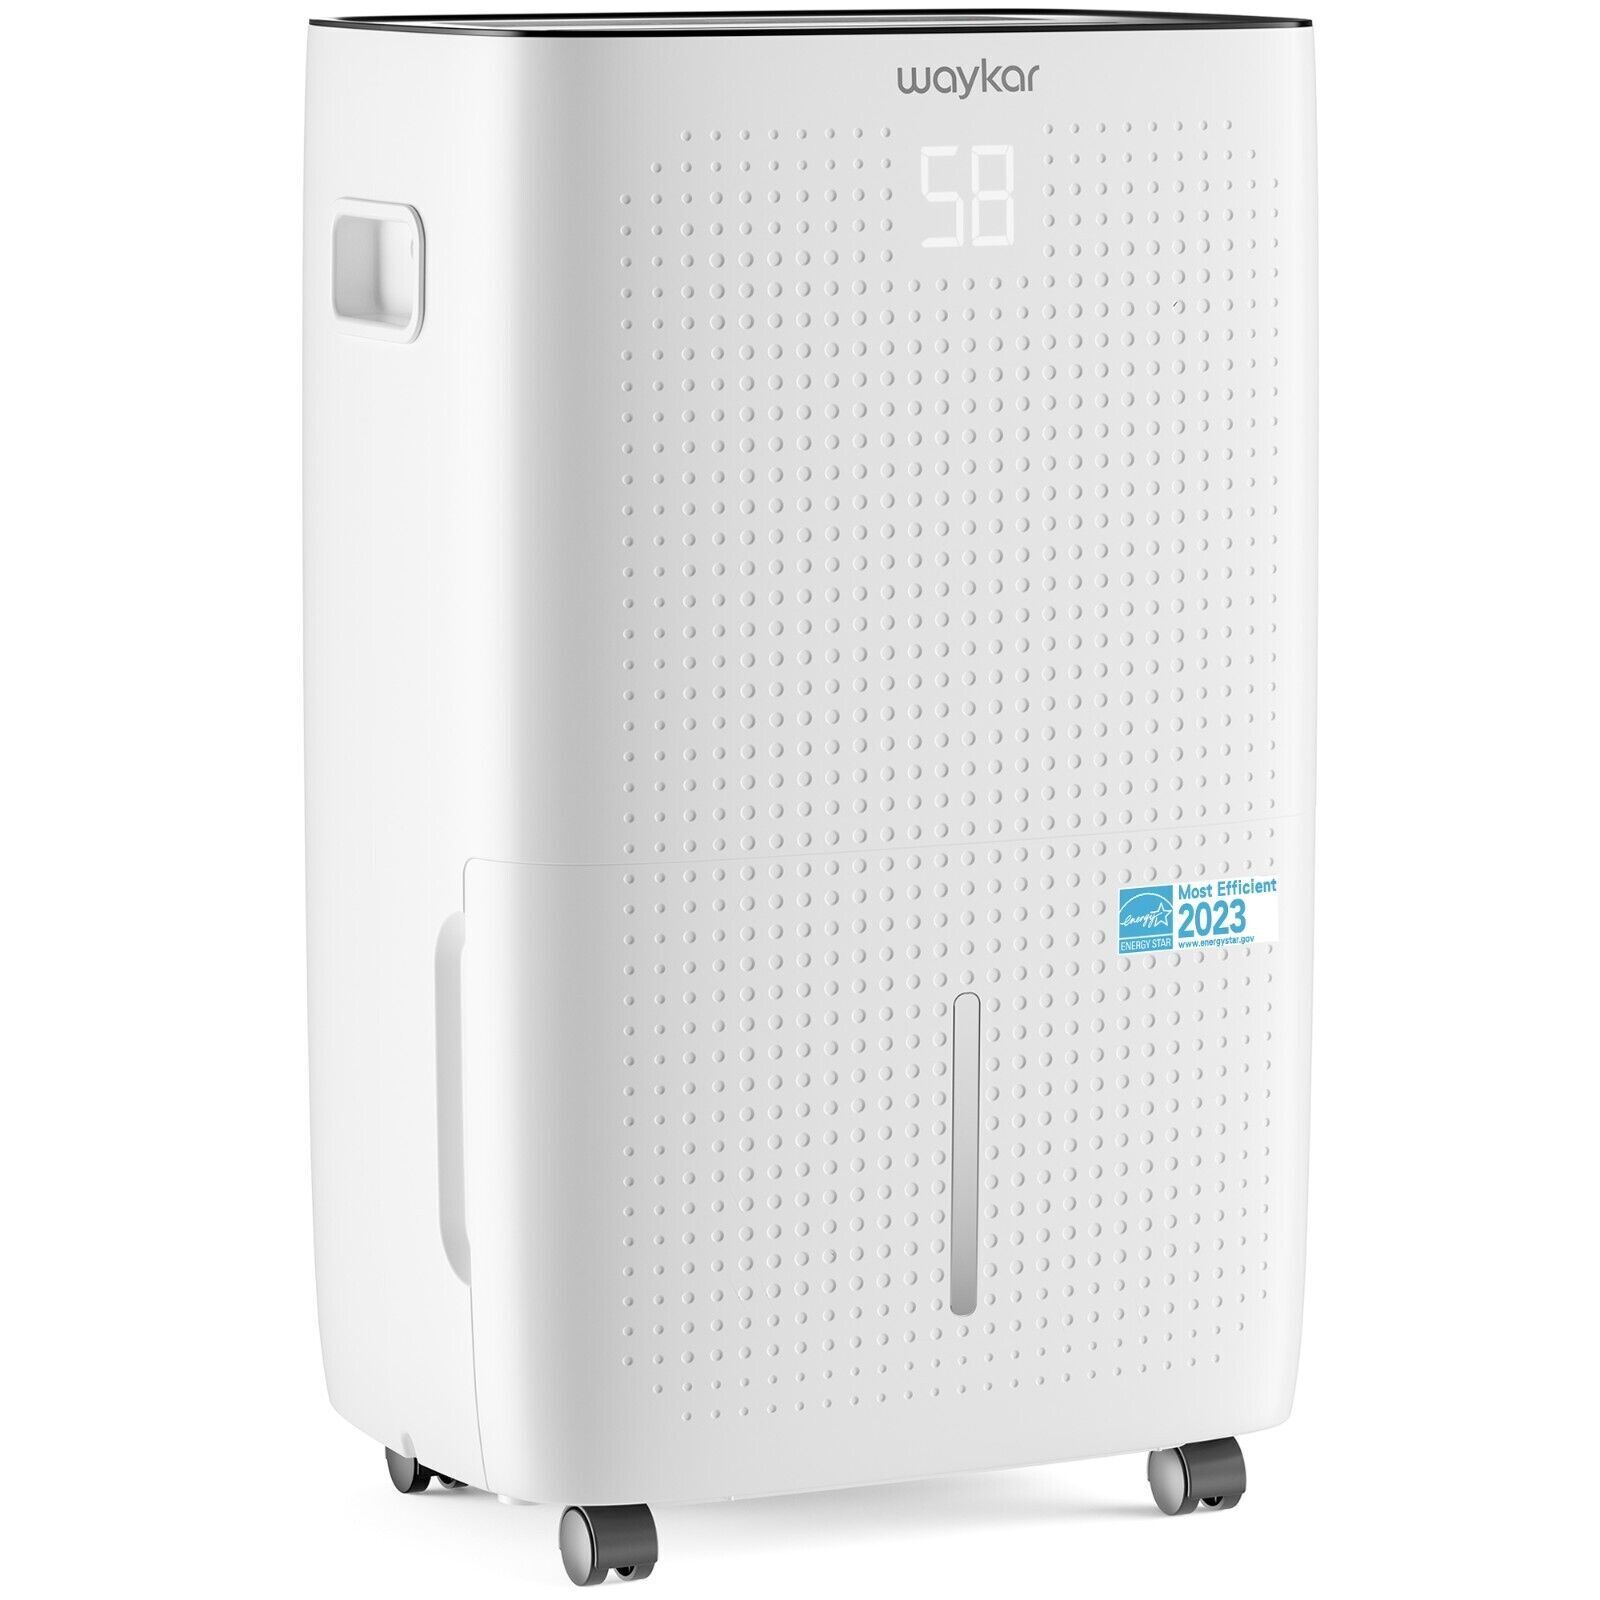 150 Pint Energy Star Dehumidifier for Home & Commercial Use – Up to 7,000 Sq. Ft